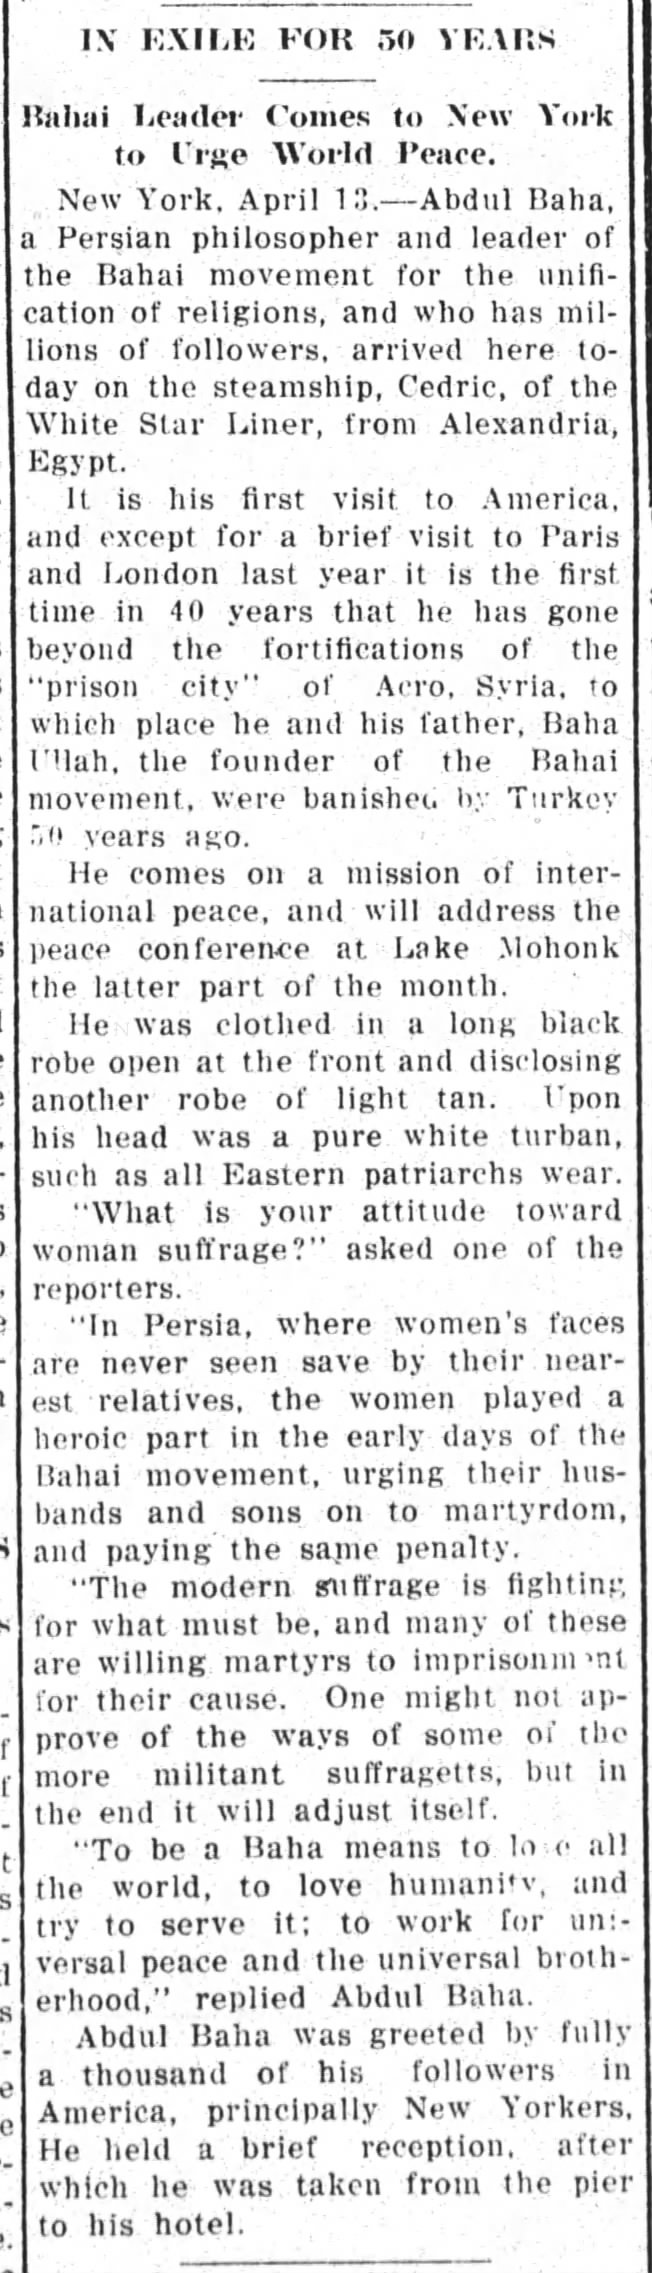 profile of Abdu'l-Baha arriving in US; Mohonk Peace Conference